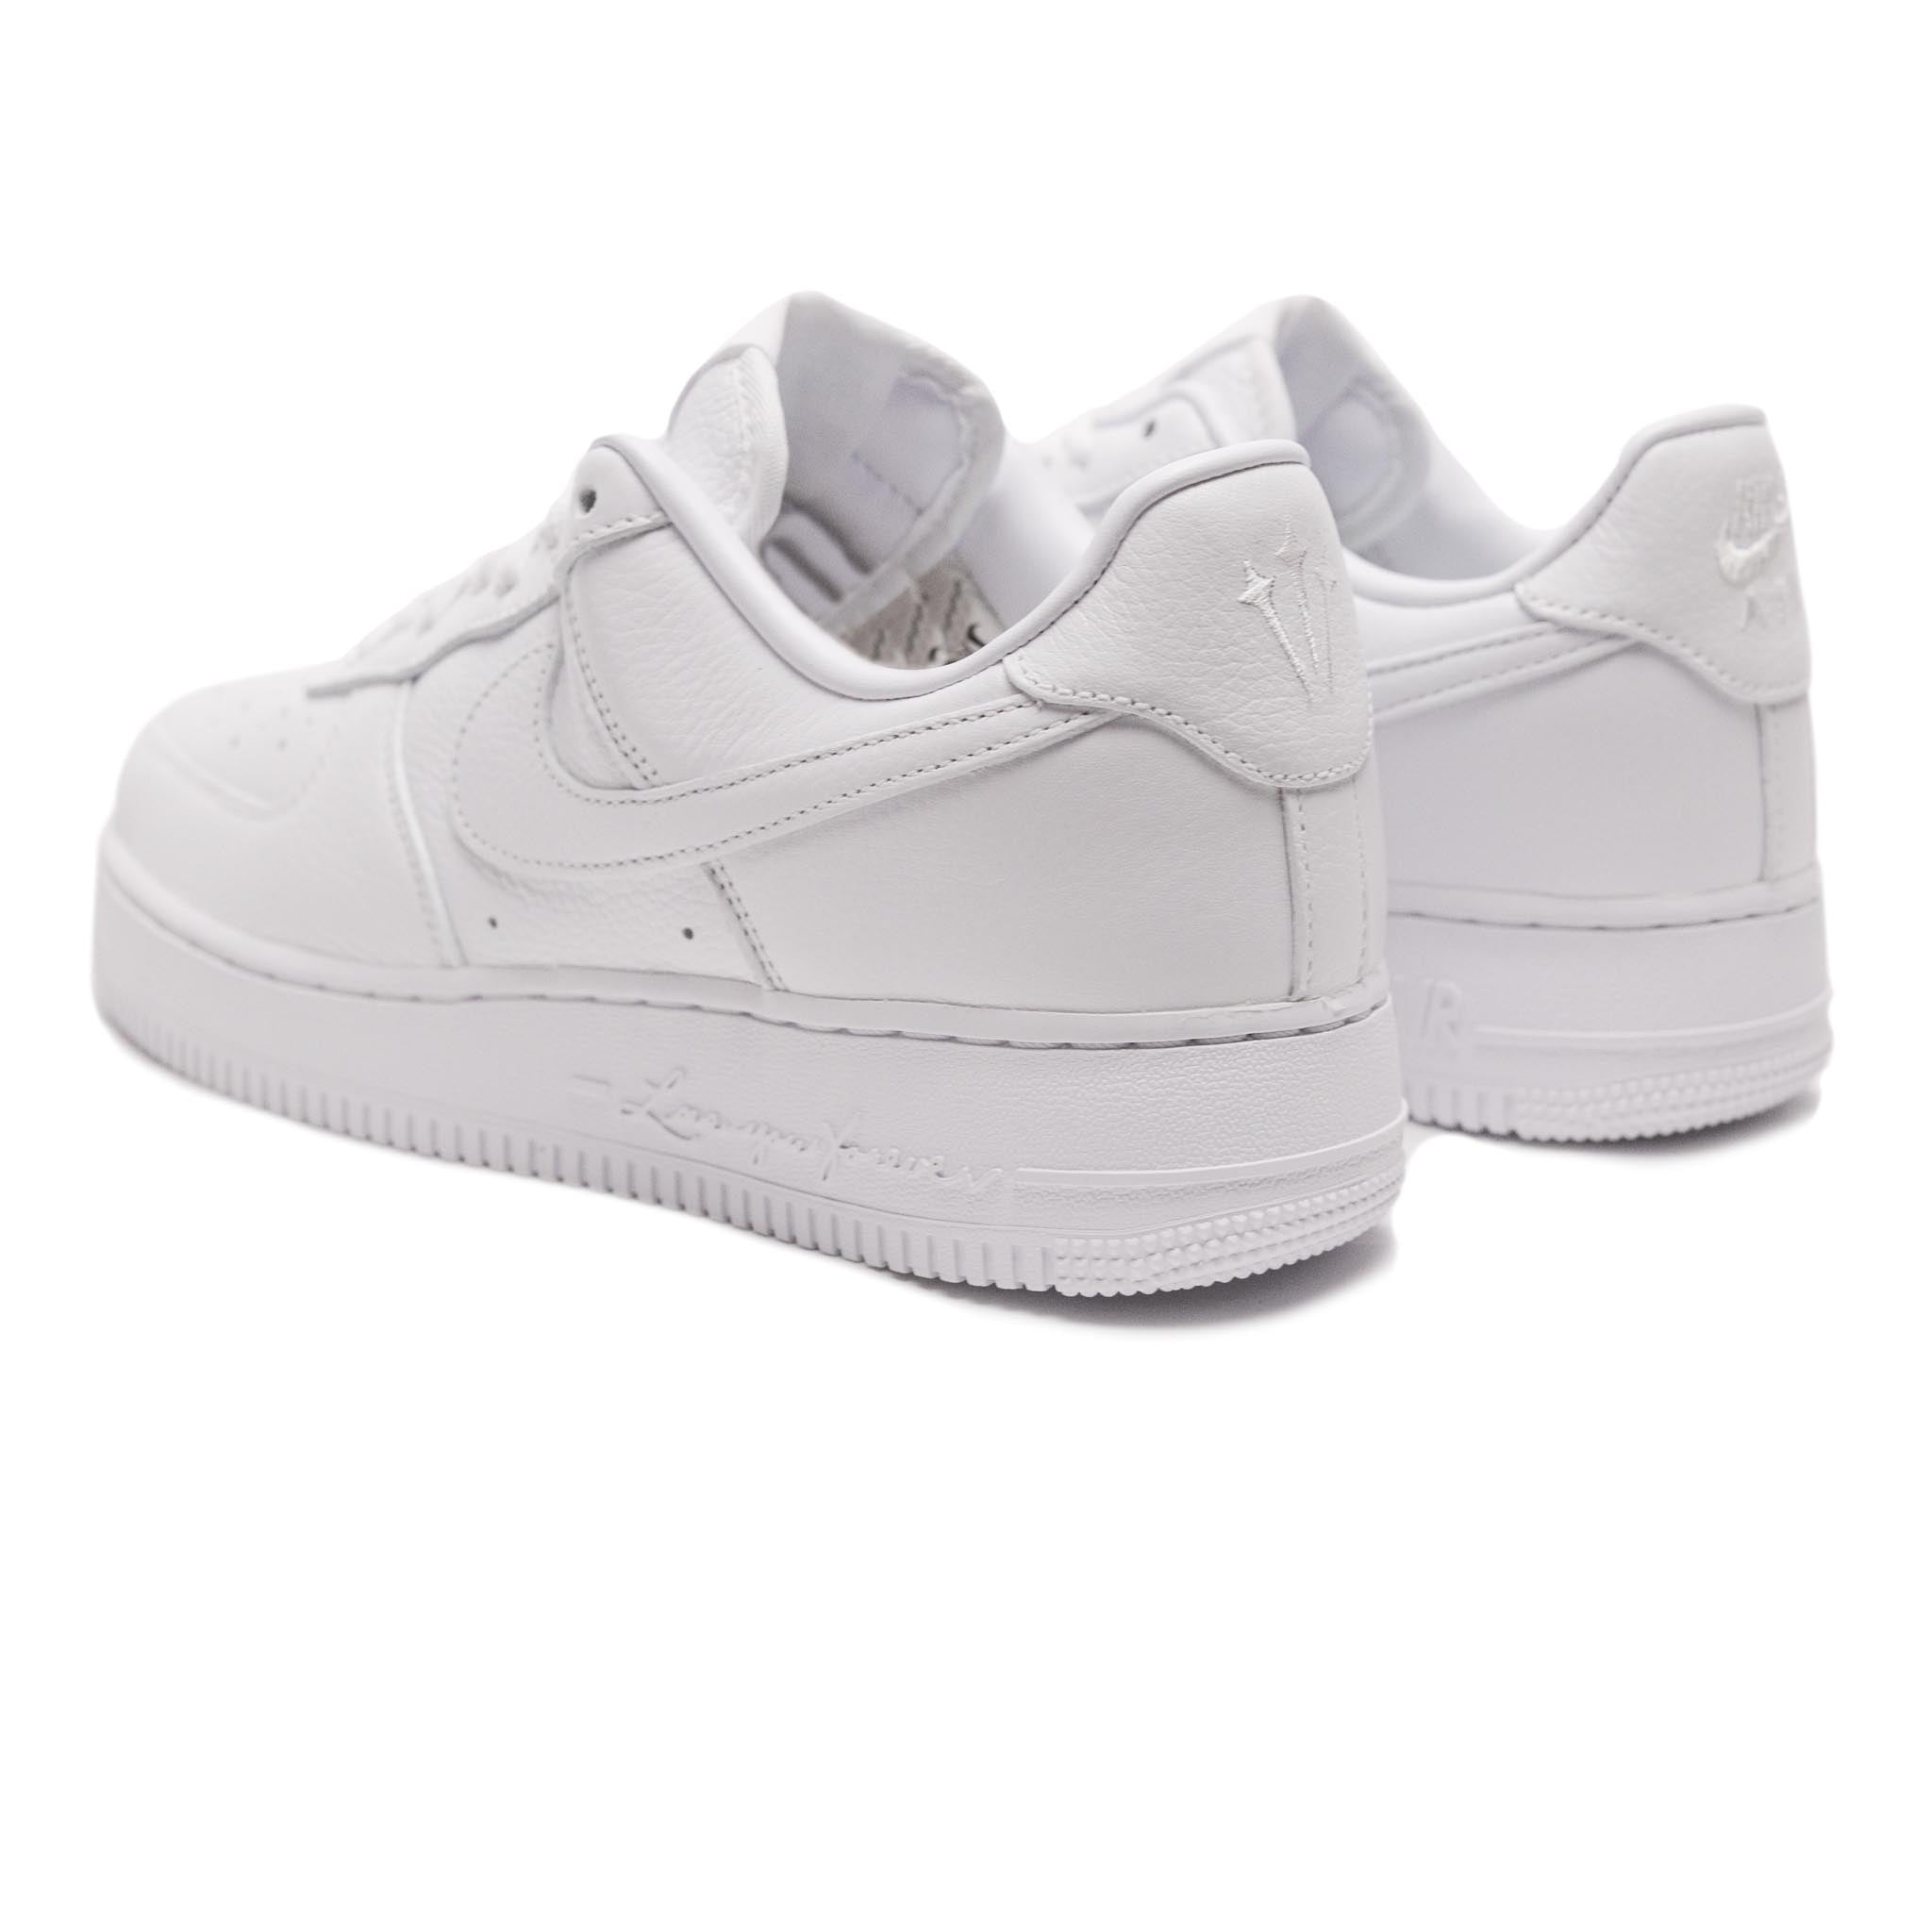 Nike x NOCTA Air Force 1 Low SP 'Certified Lover Boy'